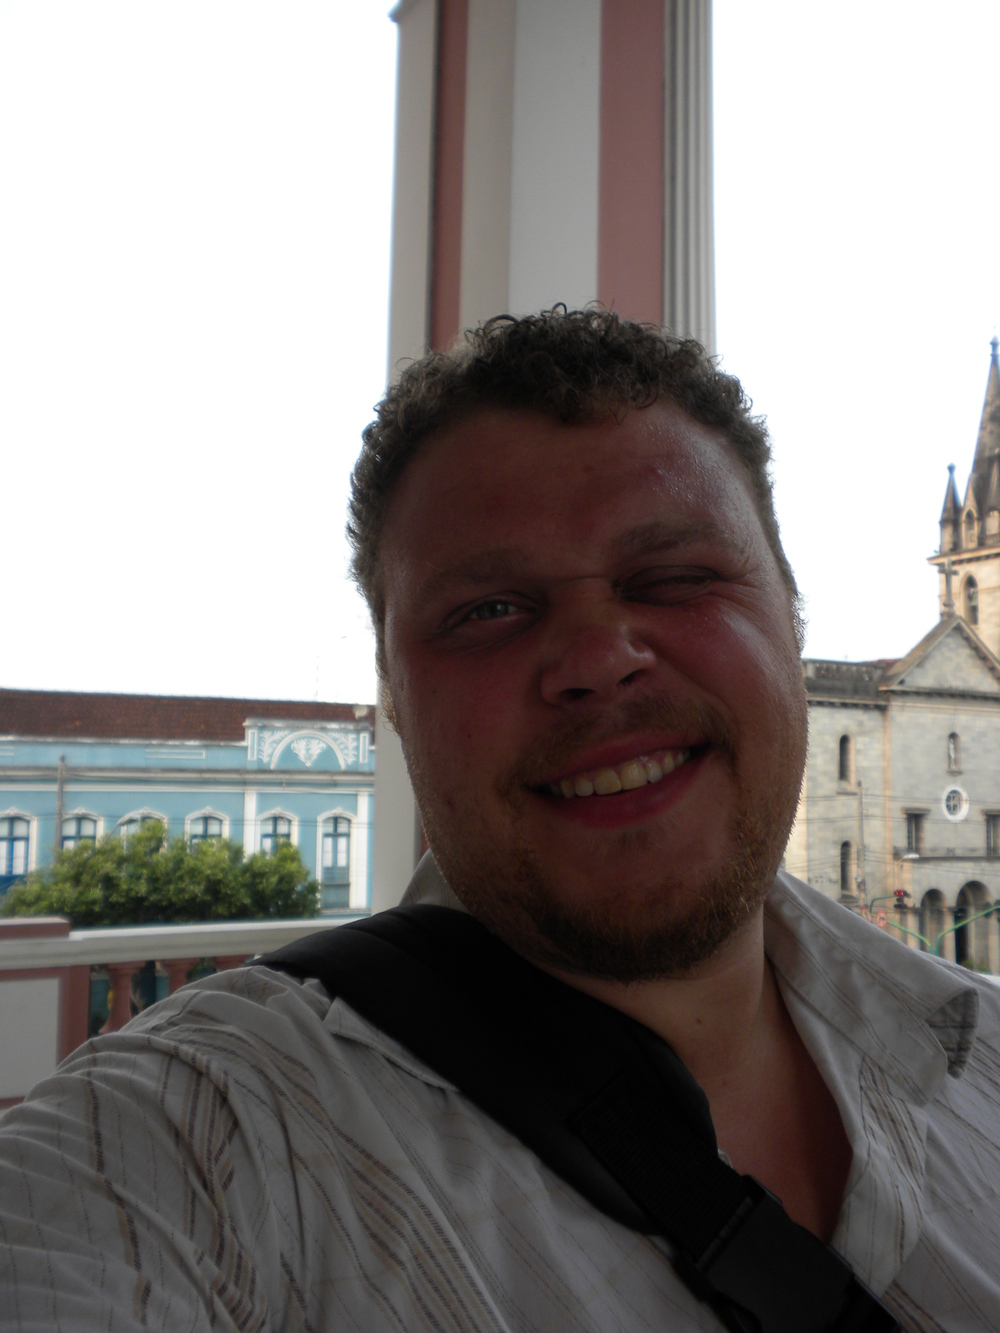   Yep... all my hair is gone! Me in Manaus at the Teatro Amazon with all my hair gone.  